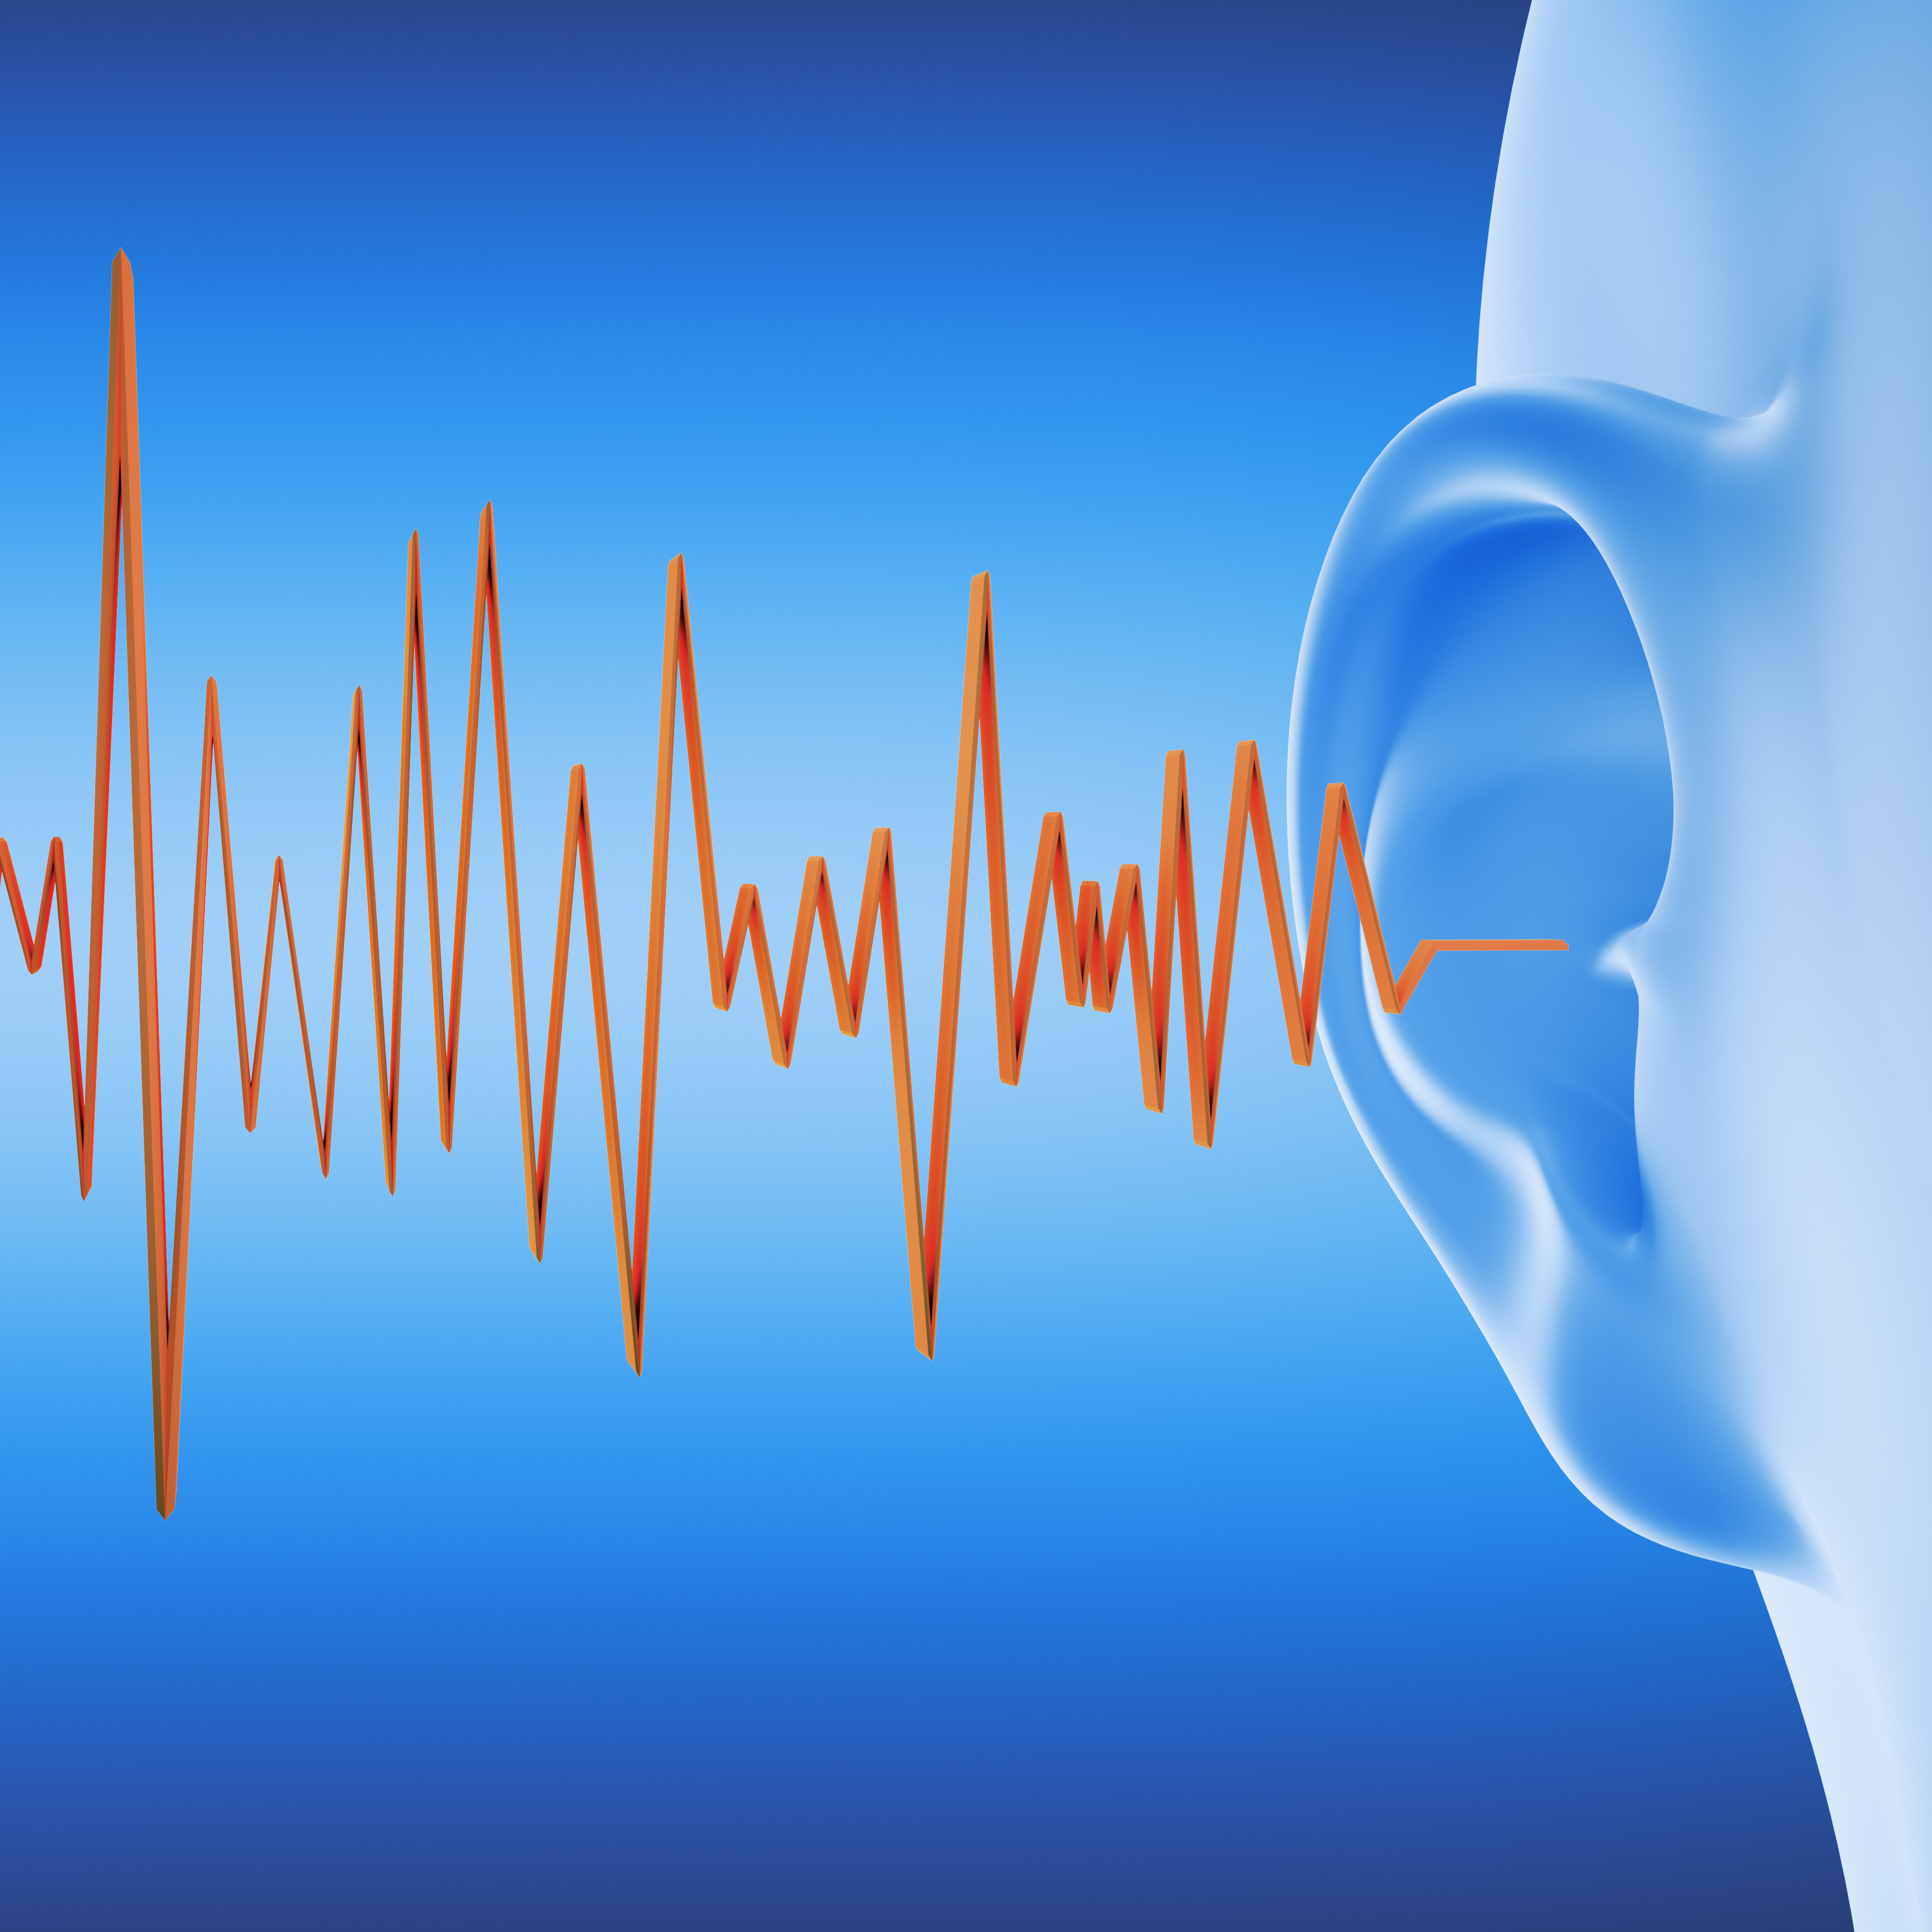 Sound waves traveling into an ear.